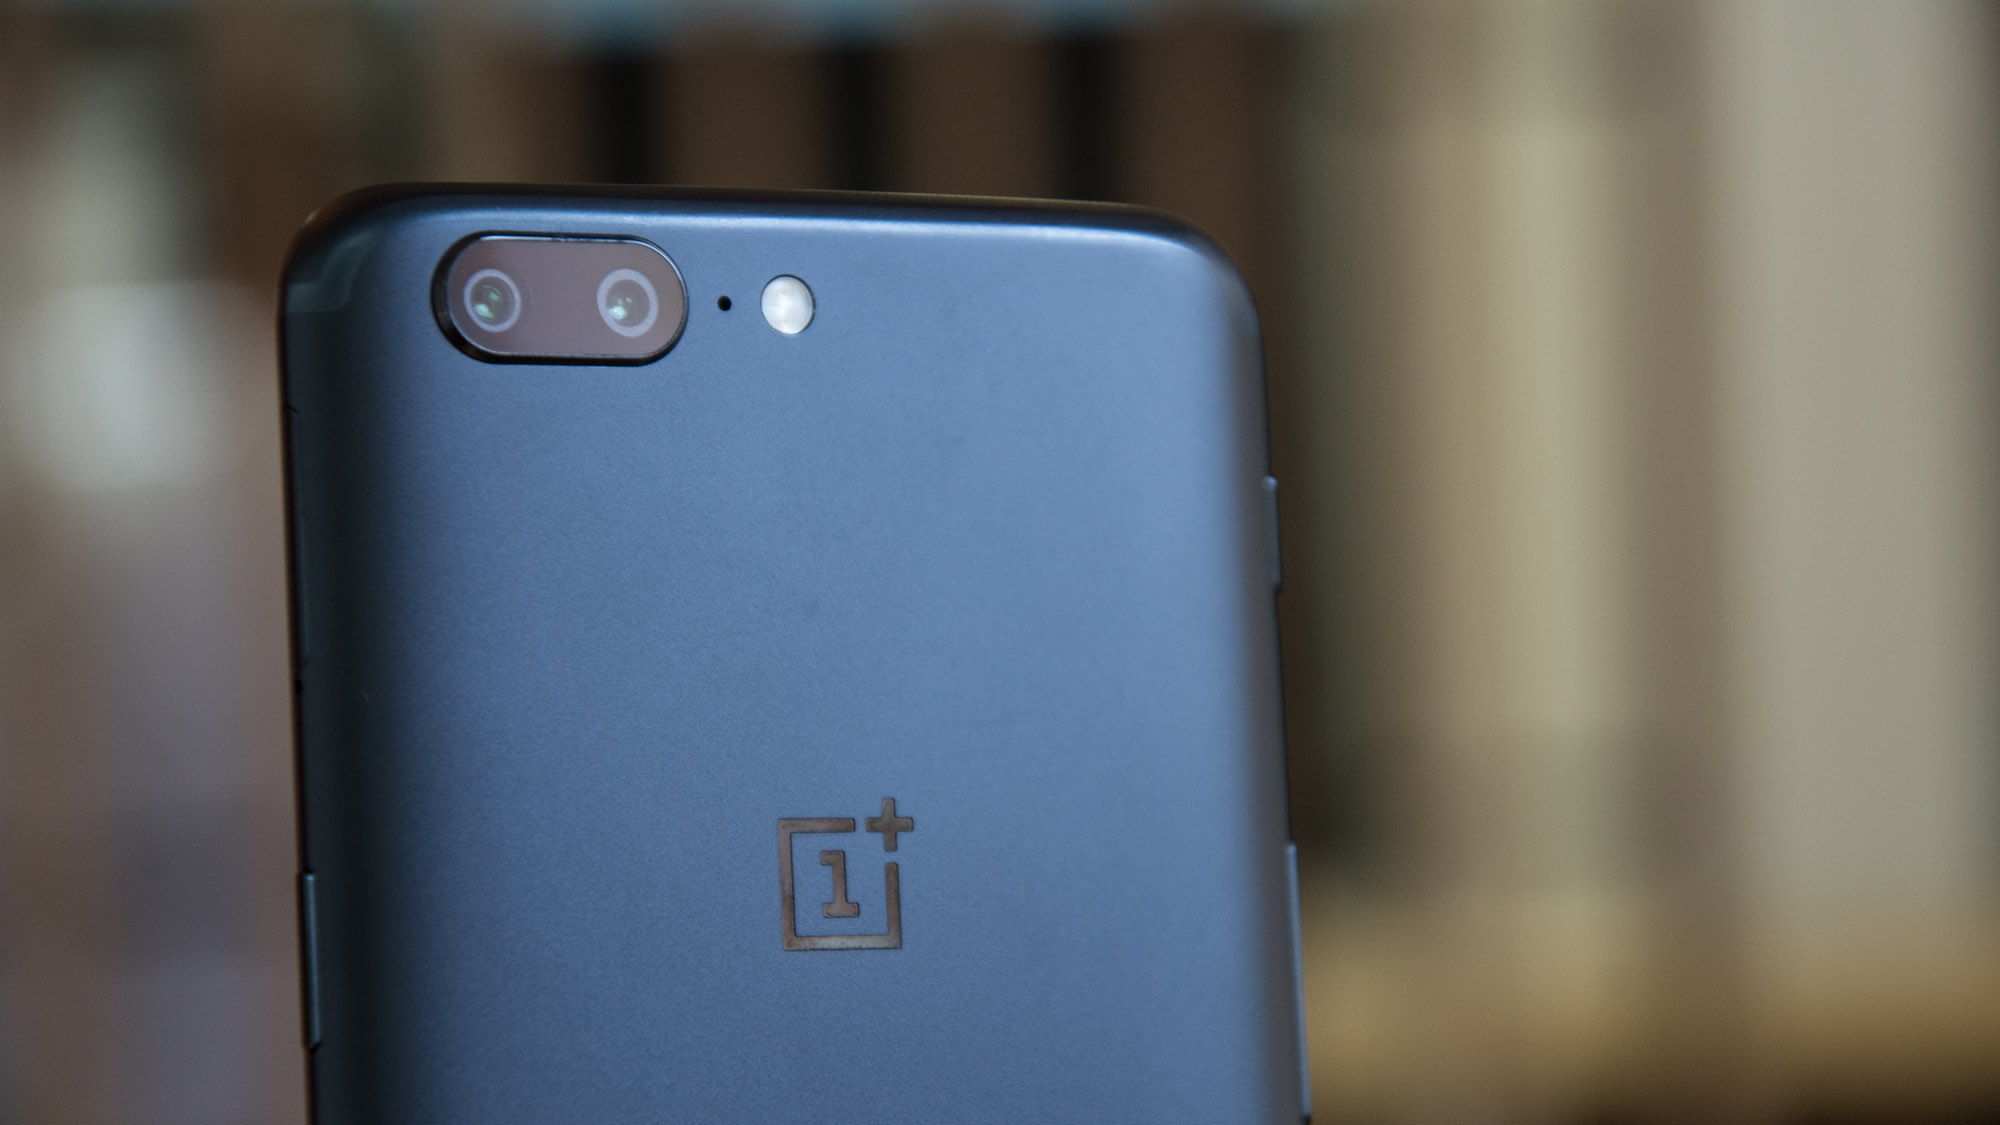 OnePlus releases OxygenOS 4.5.12 for the OnePlus 5 devices 1